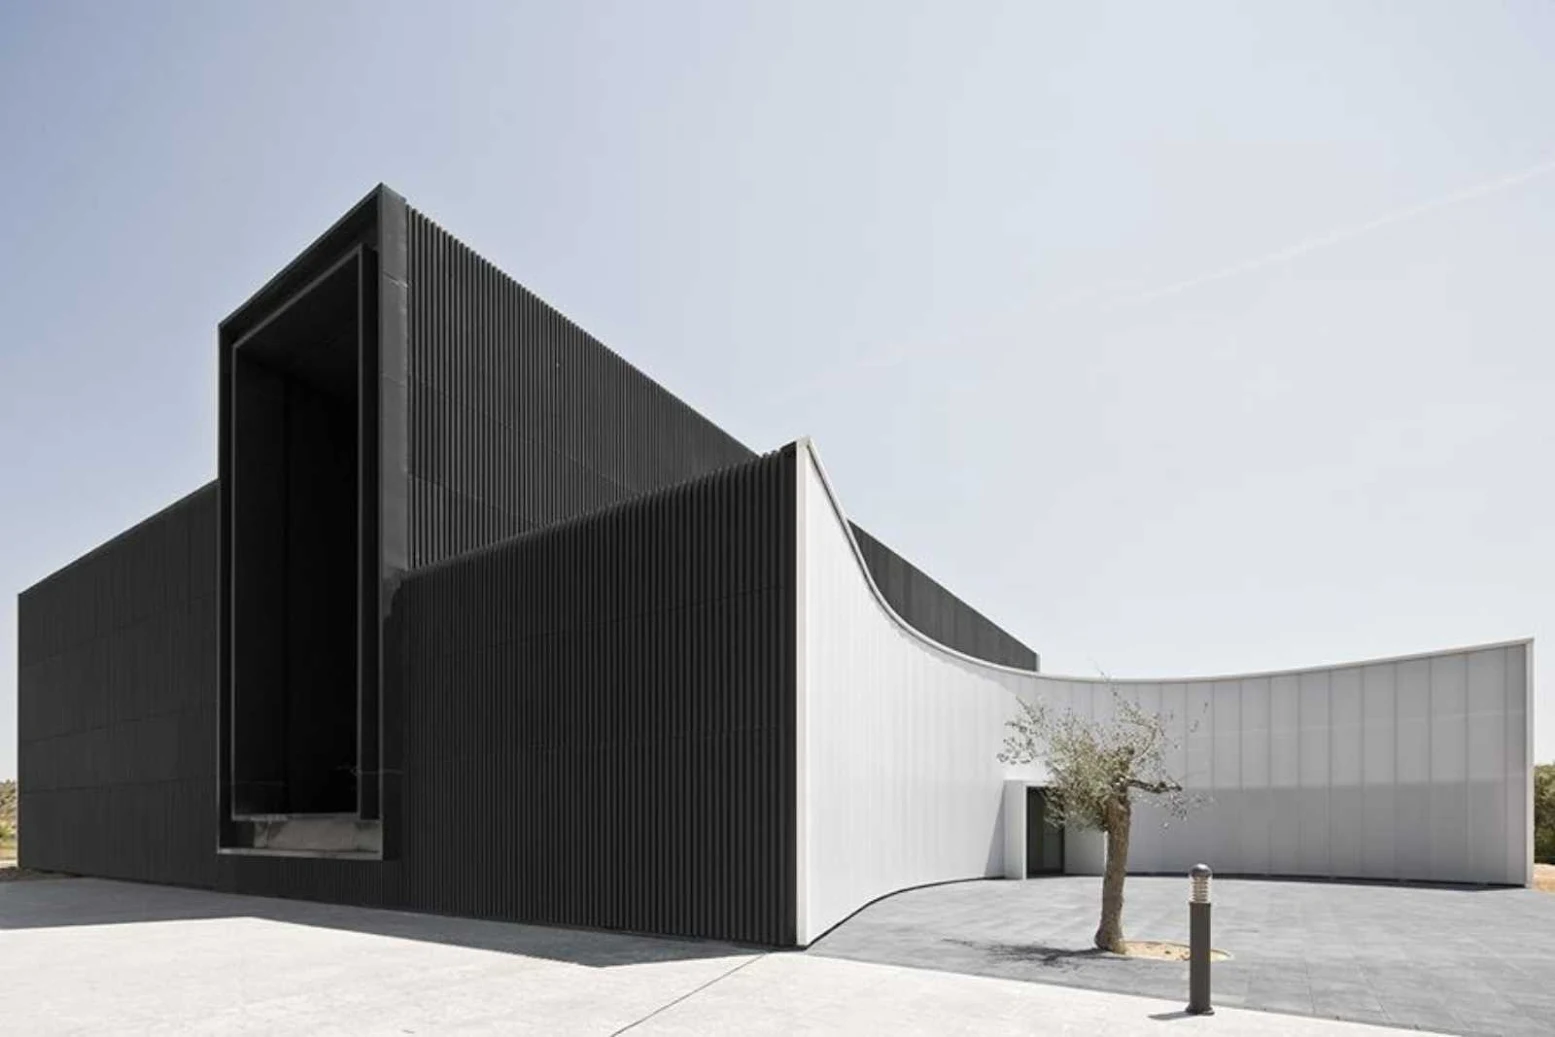 The Museum of Energy by Arquitecturia